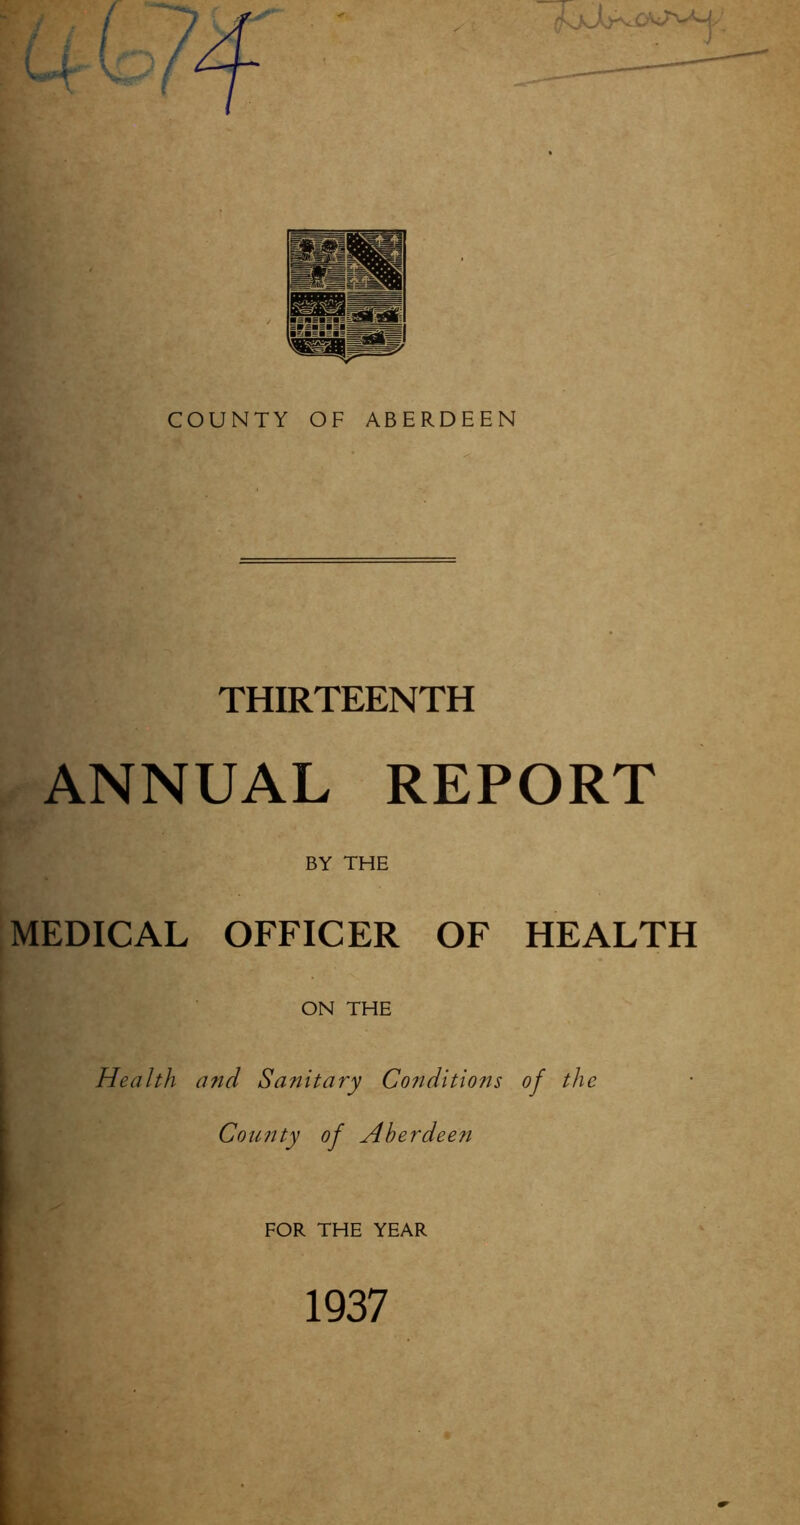 COUNTY OF ABERDEEN THIRTEENTH ANNUAL REPORT BY THE MEDICAL OFFICER OF HEALTH ON THE Health and Sanitary Conditions of the County of Aberdeen FOR THE YEAR 1937